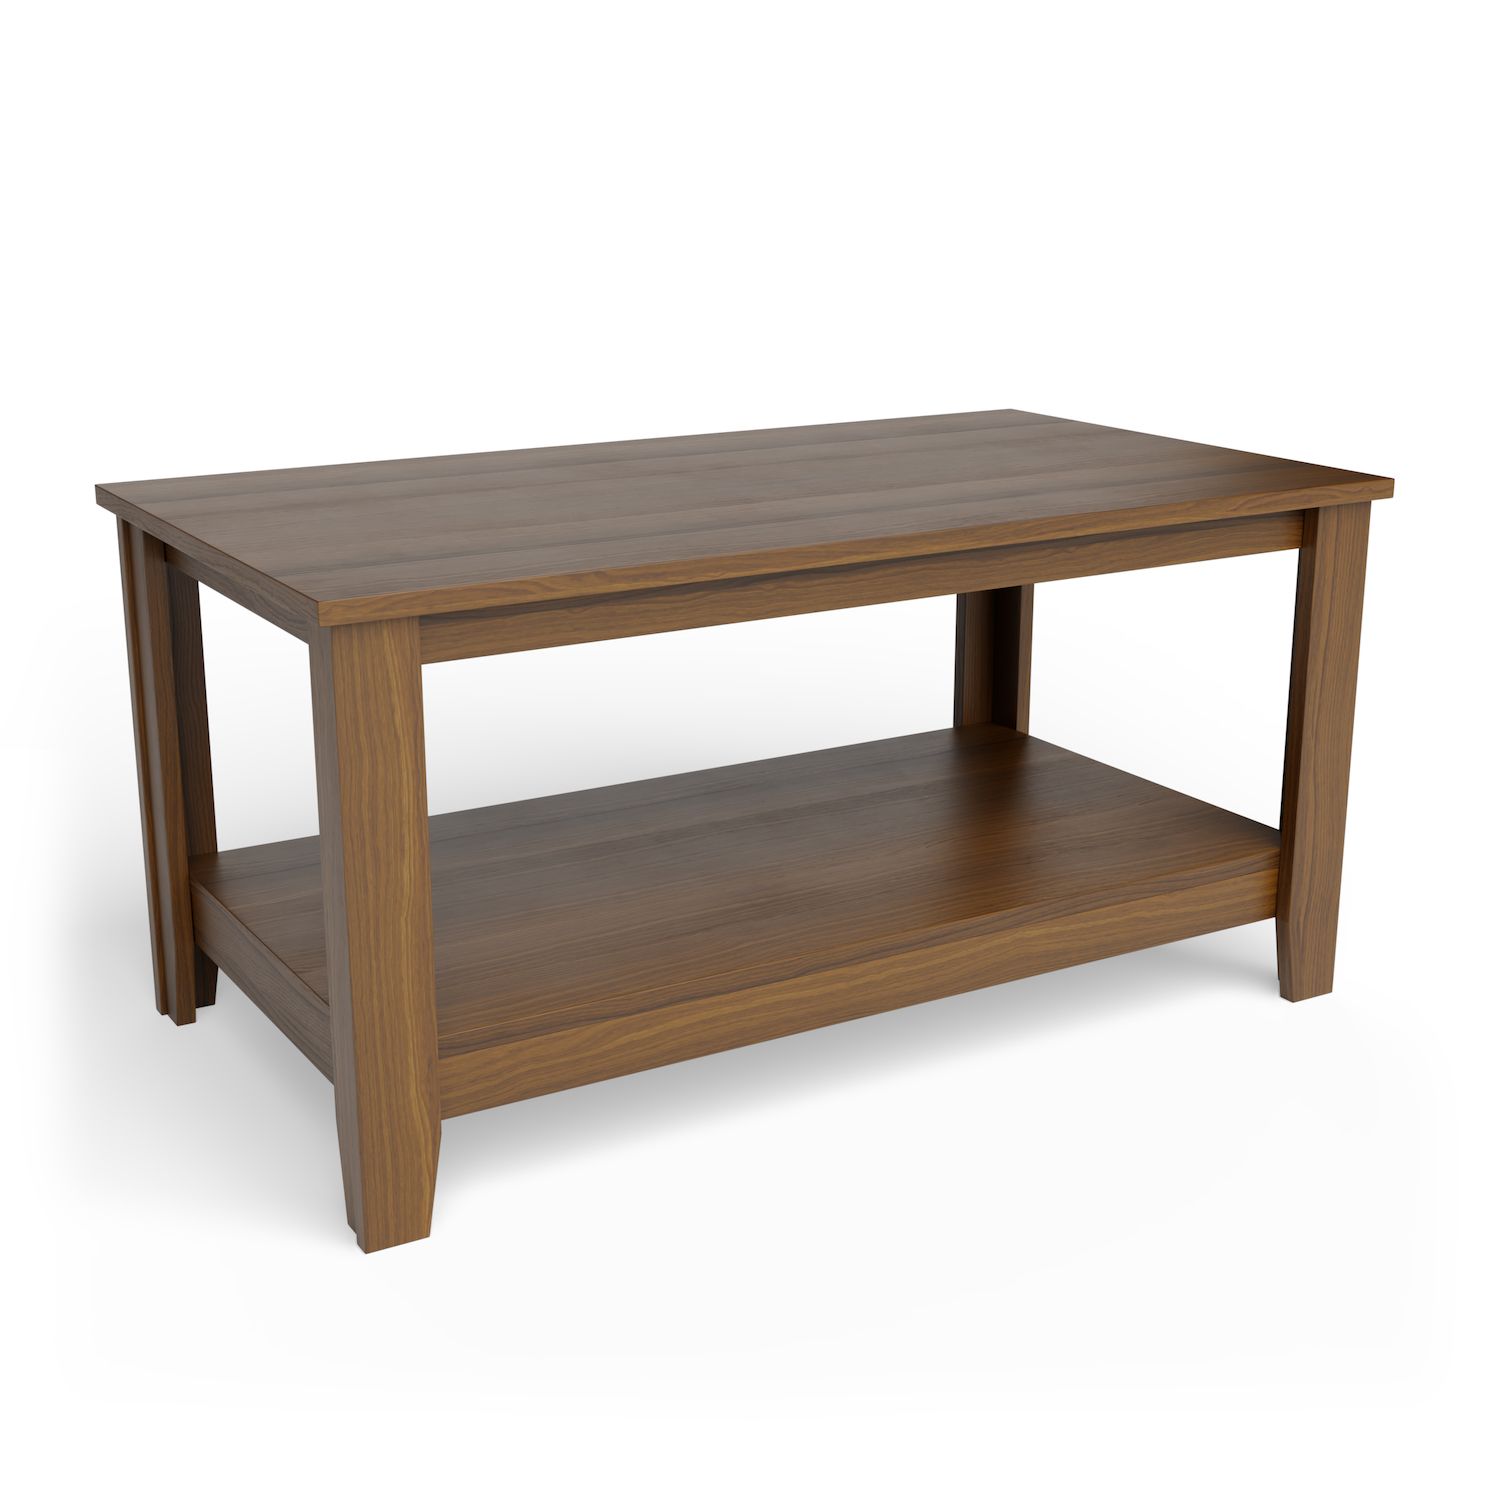 Image for Dream Collection Lucid Basic Wood Coffee Table at Kohl's.